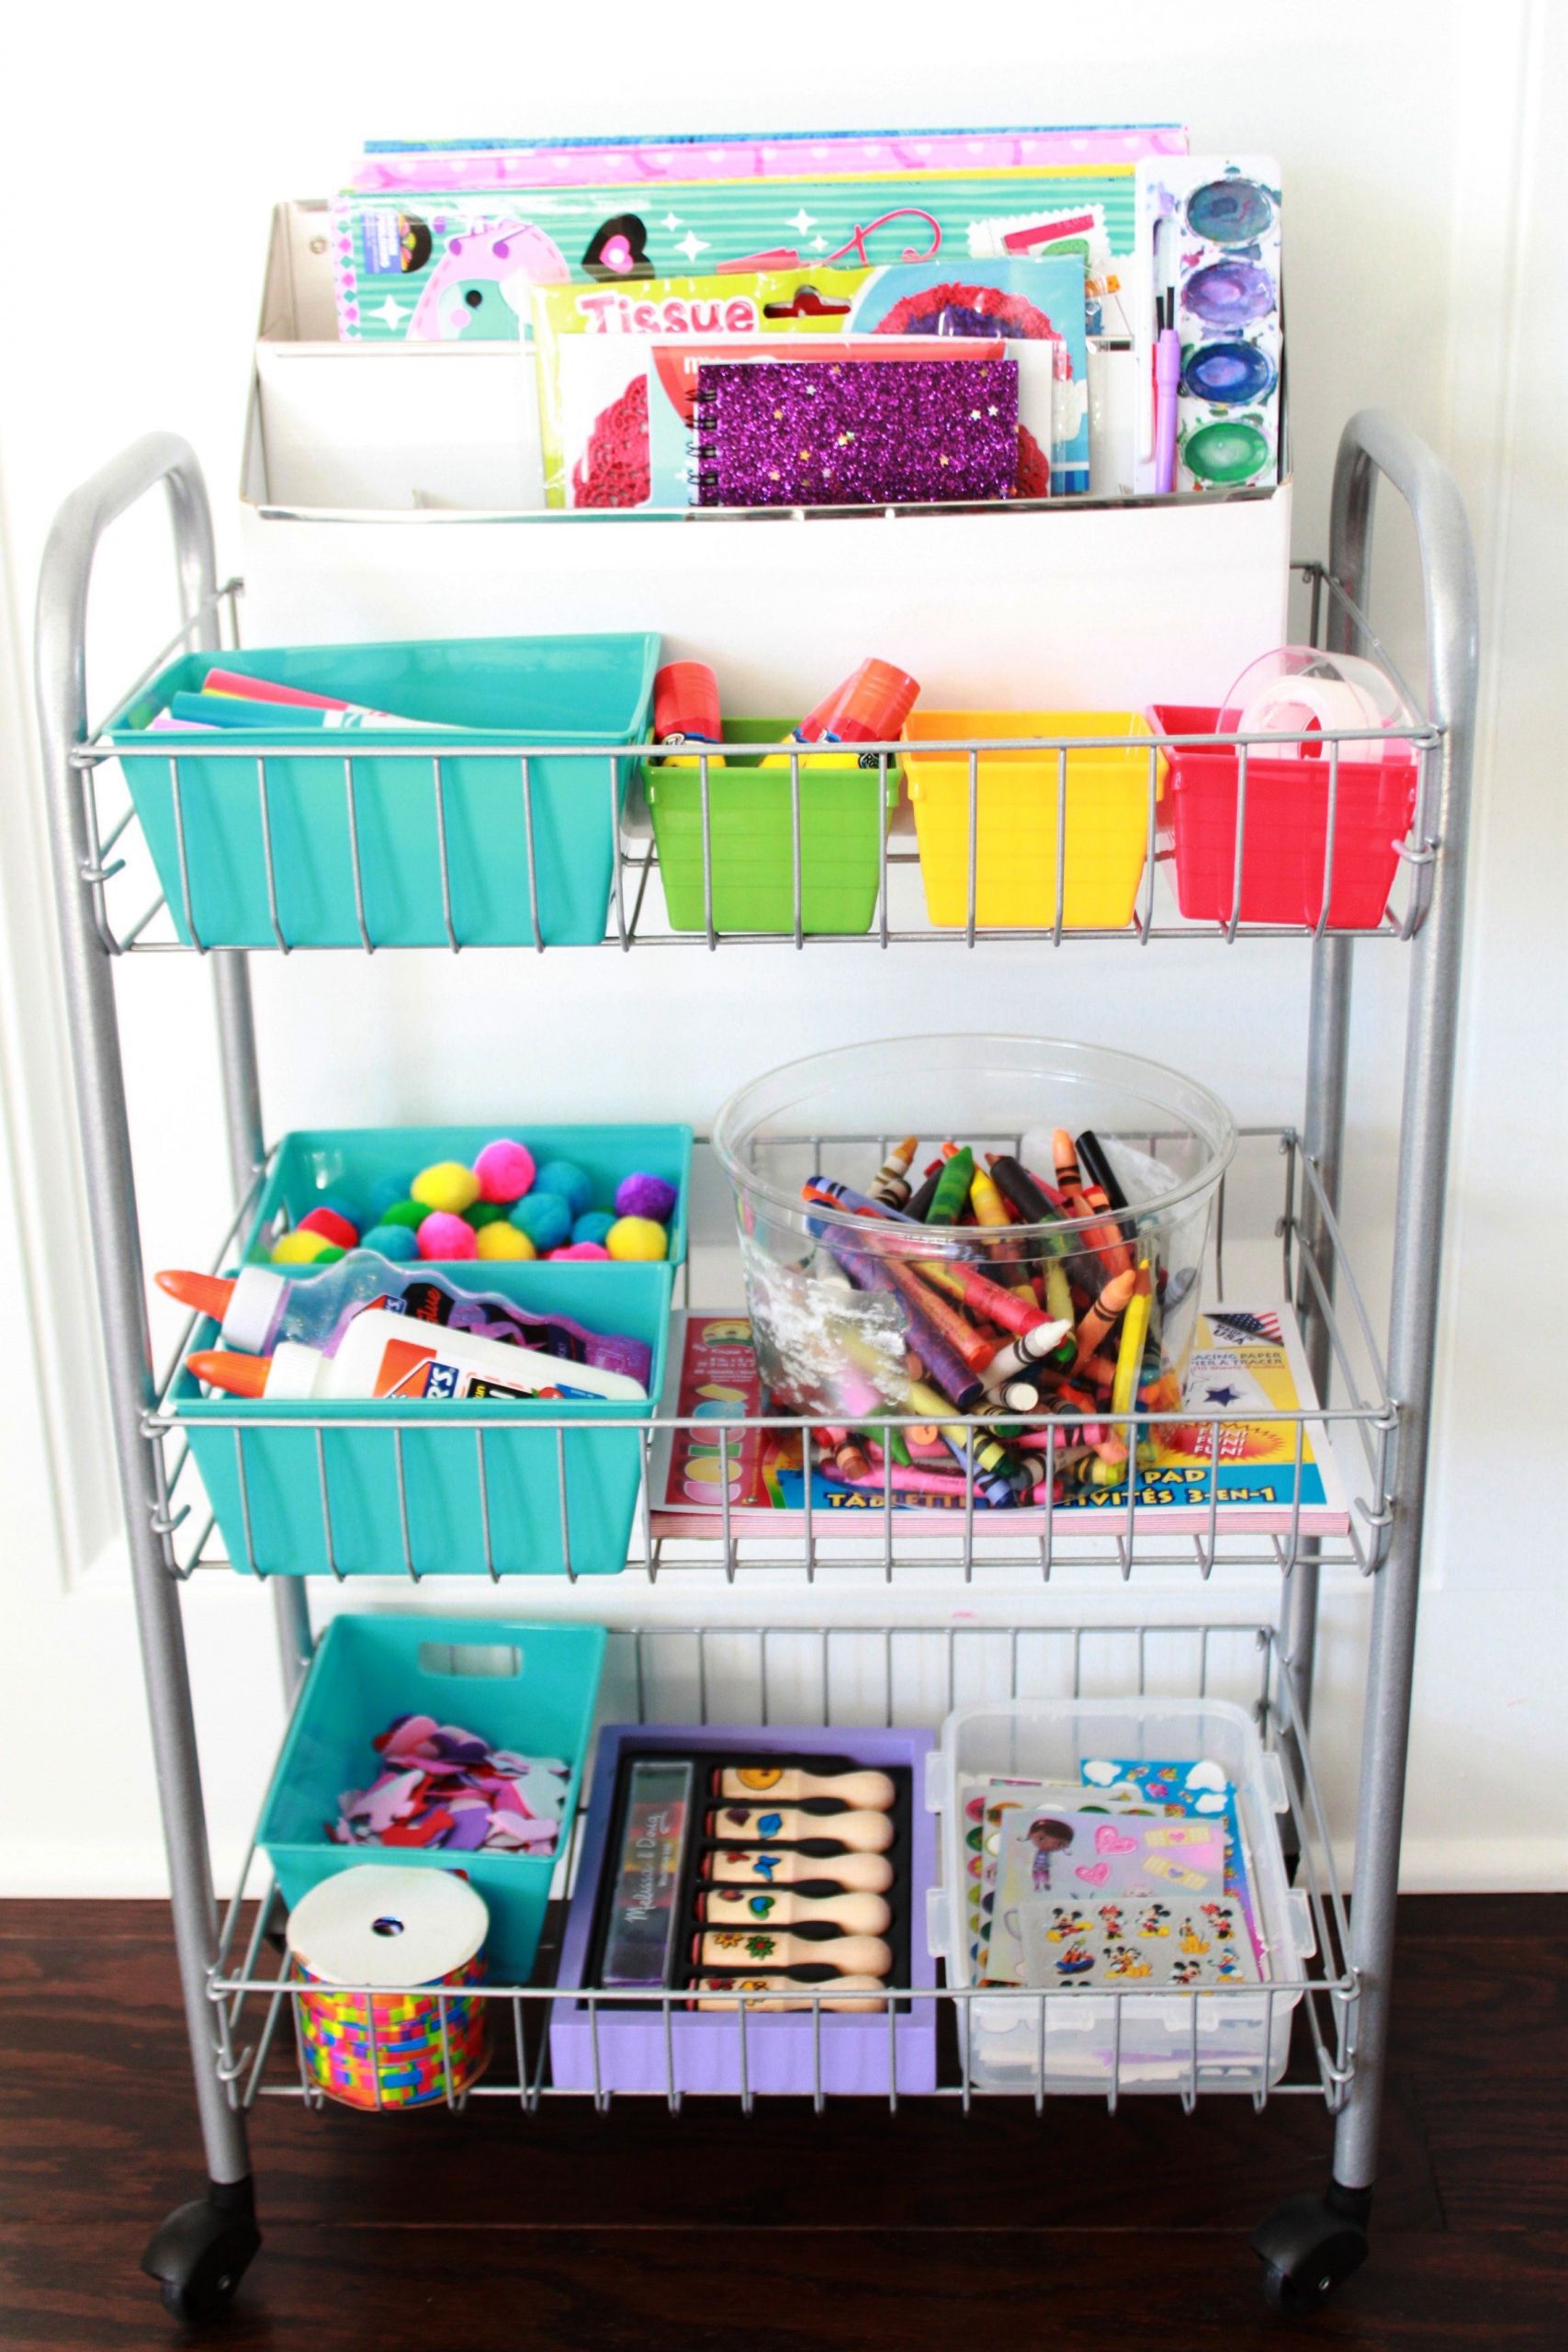 Kids Art Supply Storage
 Solution to Blake ting into all N s art supplies and